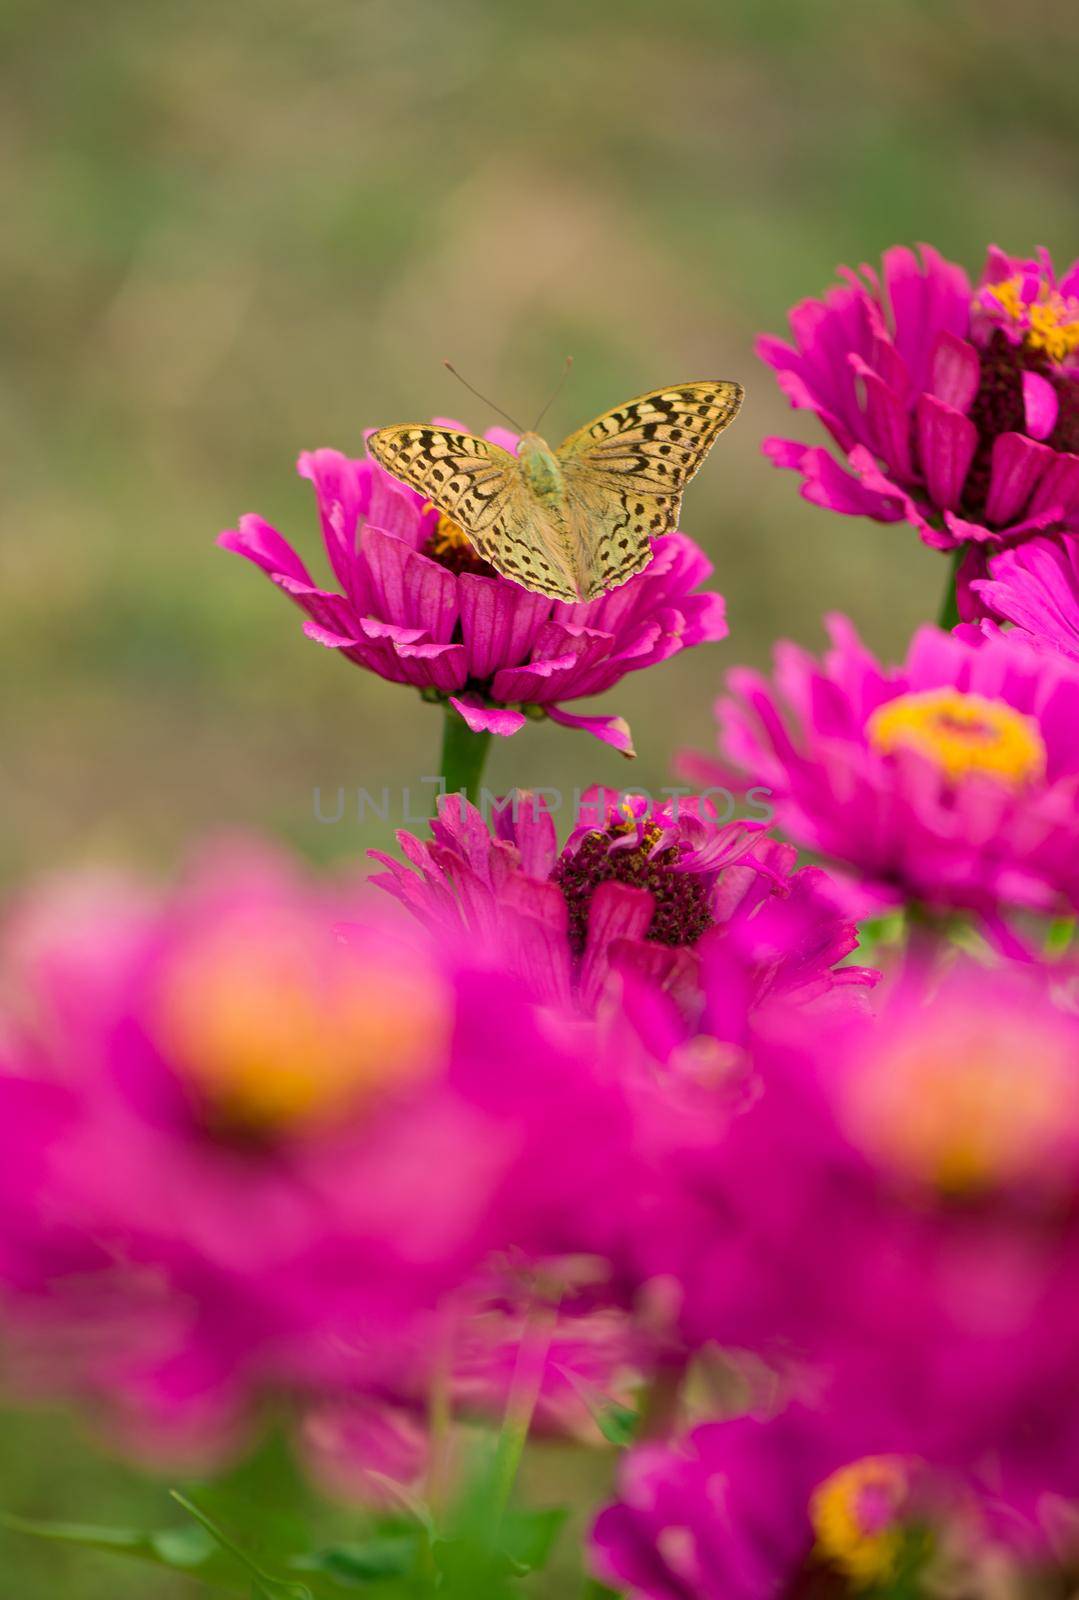 Closed up Butterfly on flower -Blur flower background. by aprilphoto